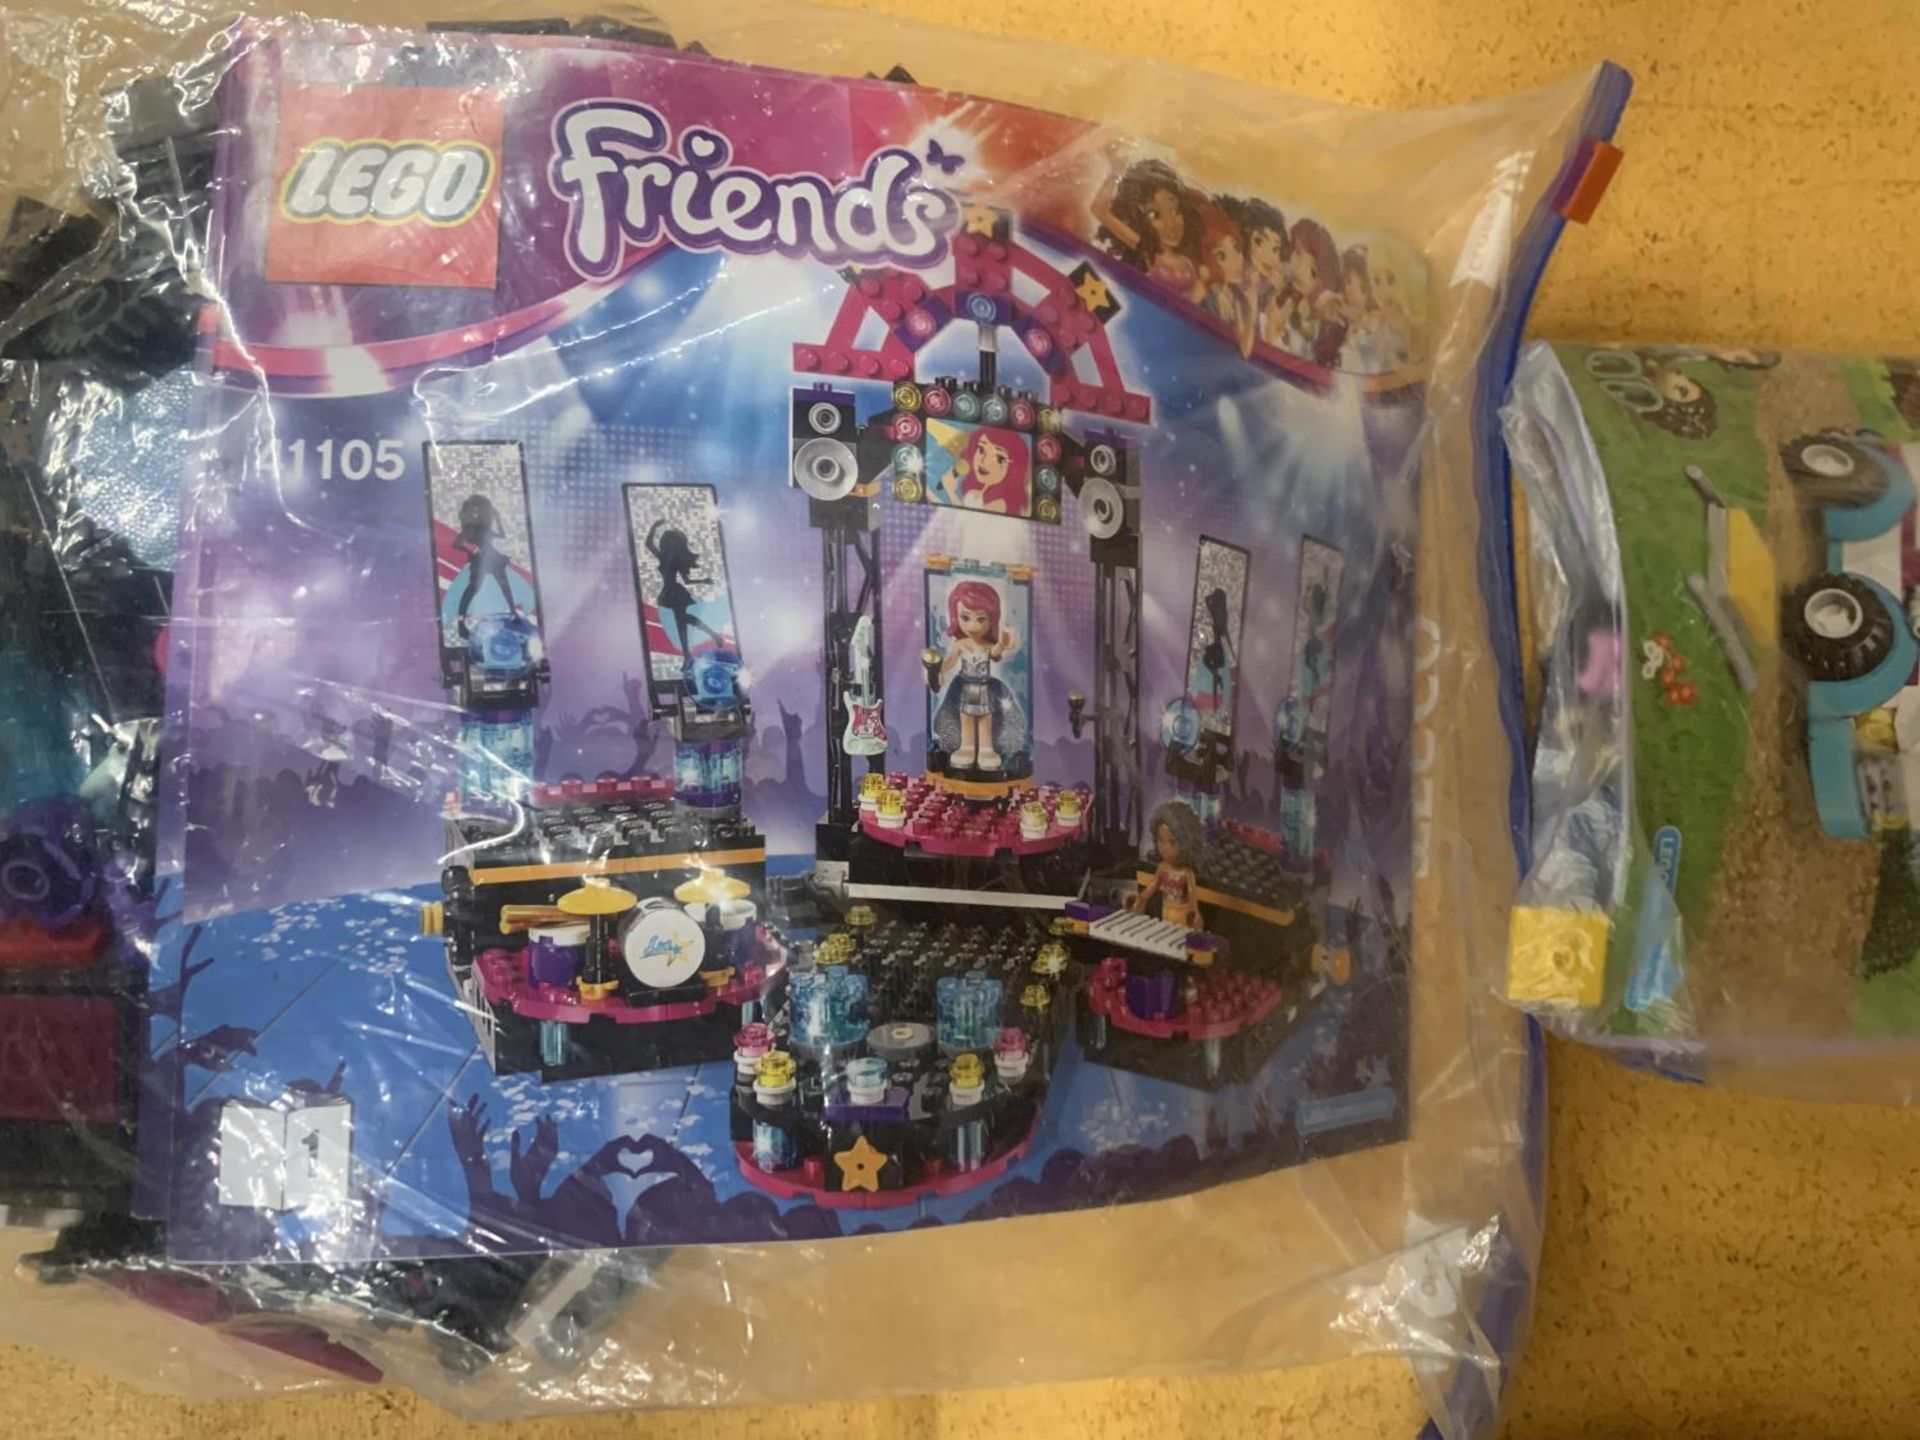 THREE LEGO FRIENDS SETS WITH INSTRUCTIONS, 41047, 41105, AND 41086 - Image 2 of 3